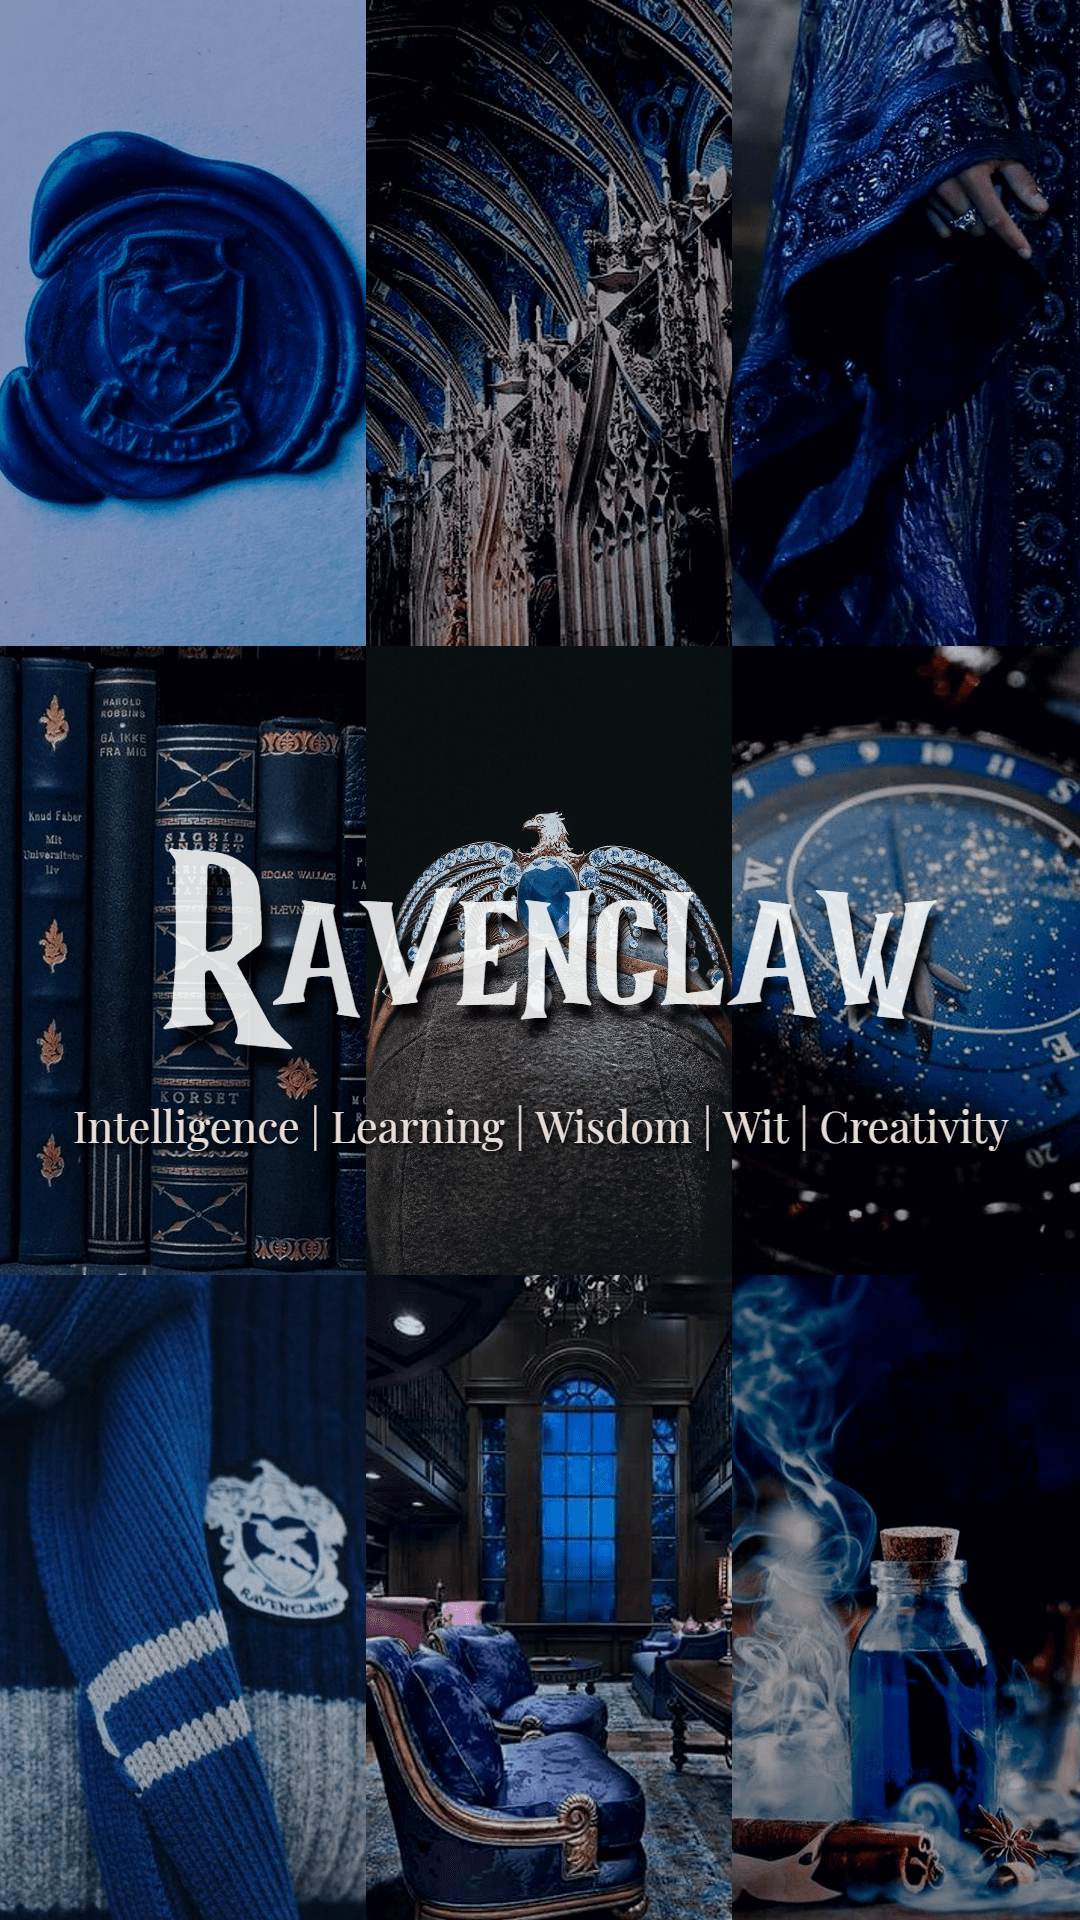 A collage of images representing the traits of the house of Ravenclaw. - Ravenclaw